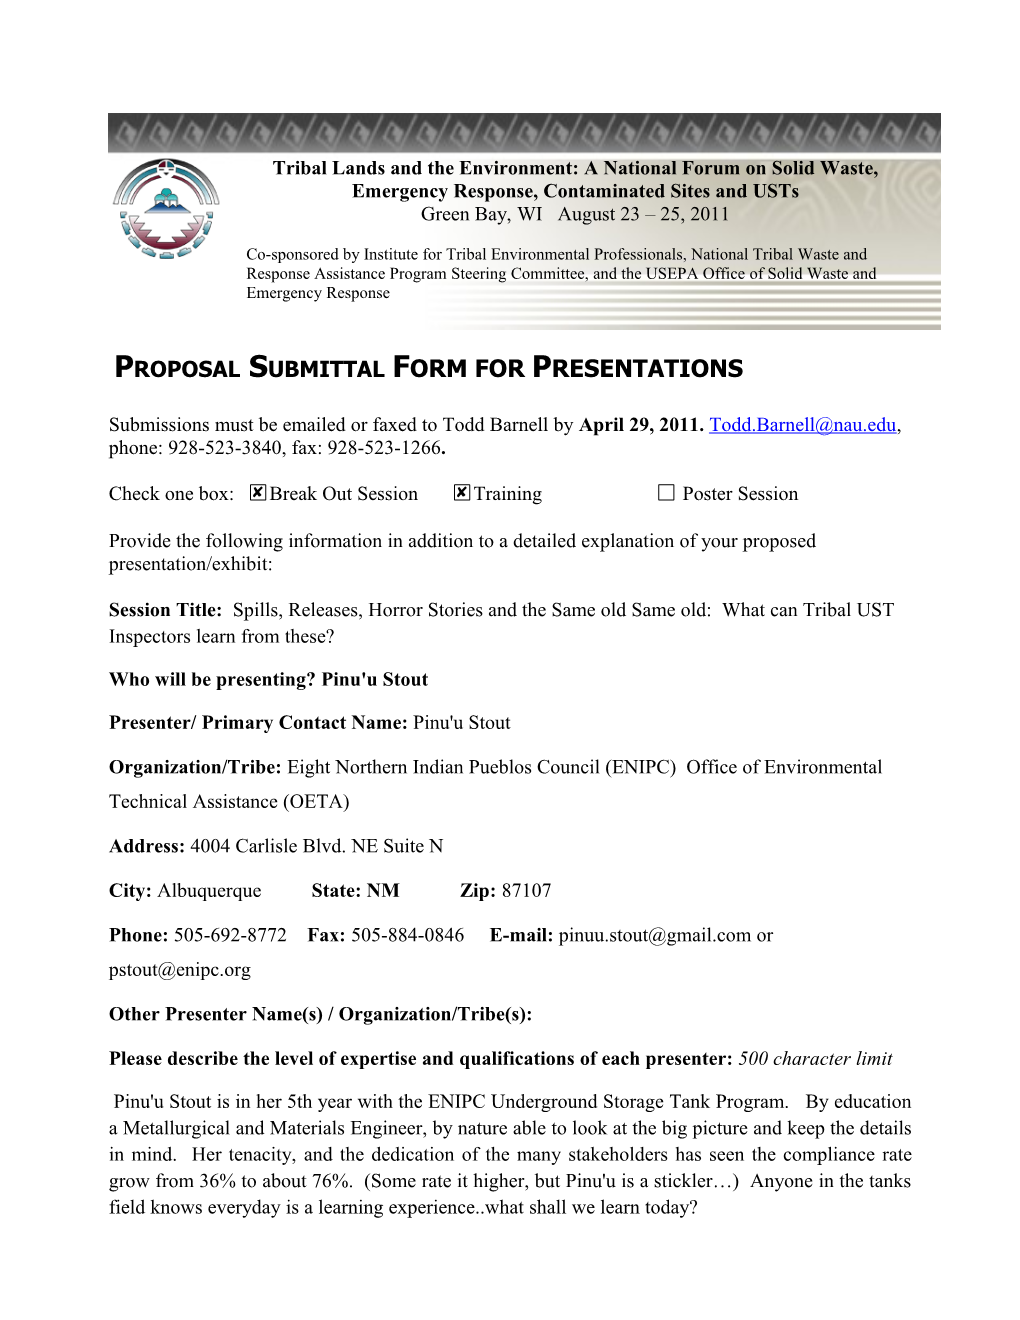 Proposal Submittal FORM for PRESENTATIONS